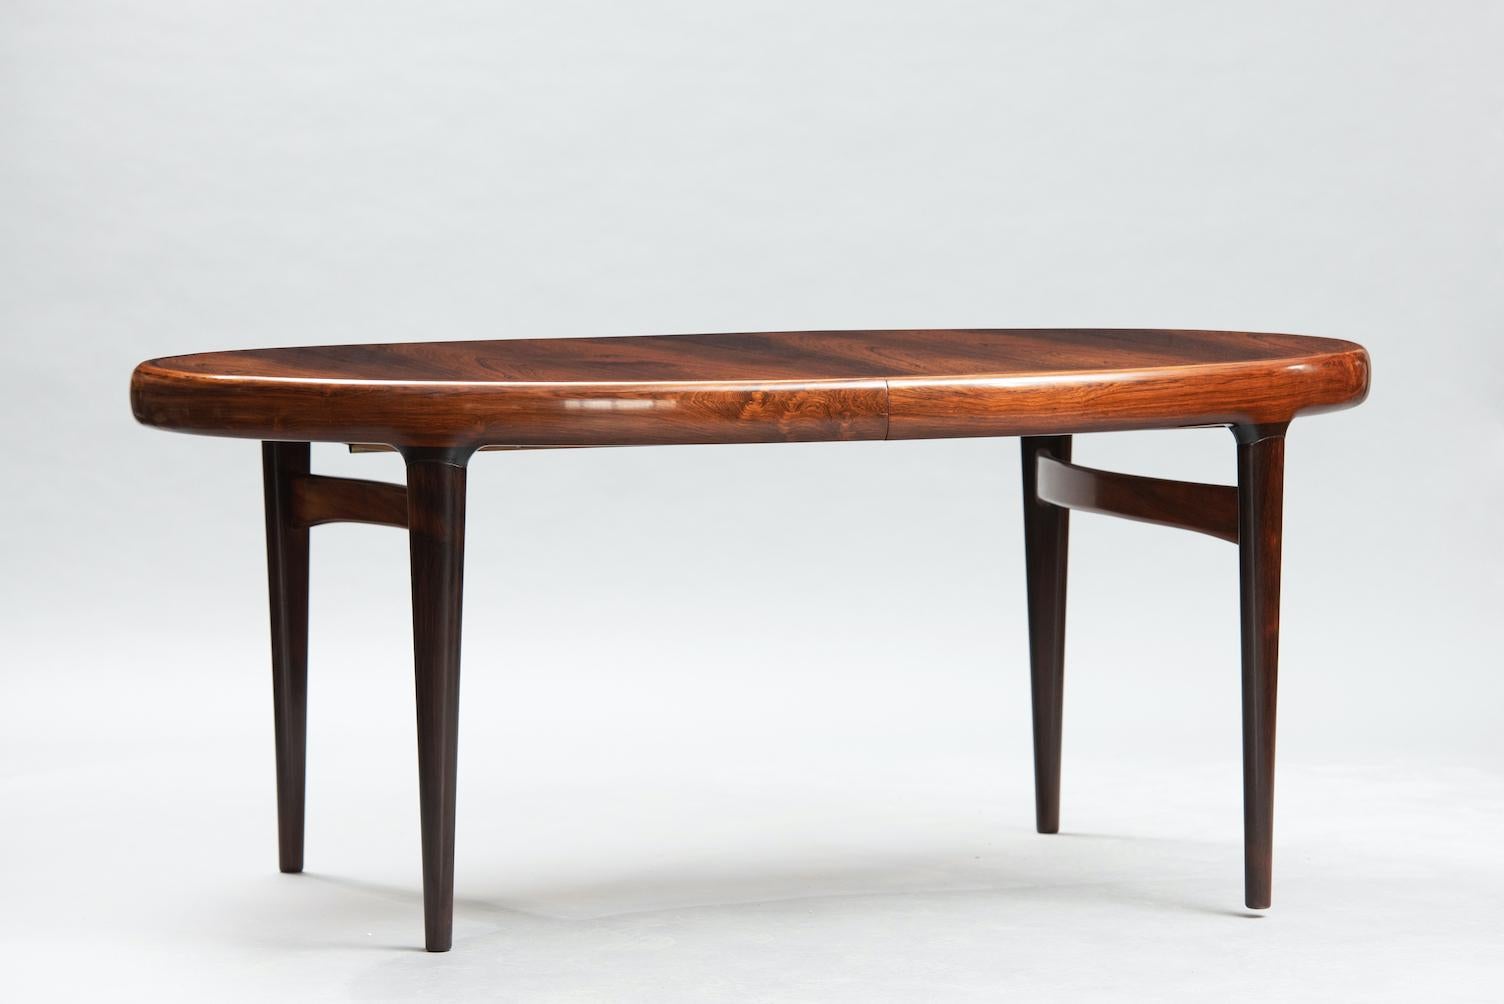 Mid-Century Modern Danish extendible oval dining table
Dimensions: Closed 168 cm, open 286 cm.